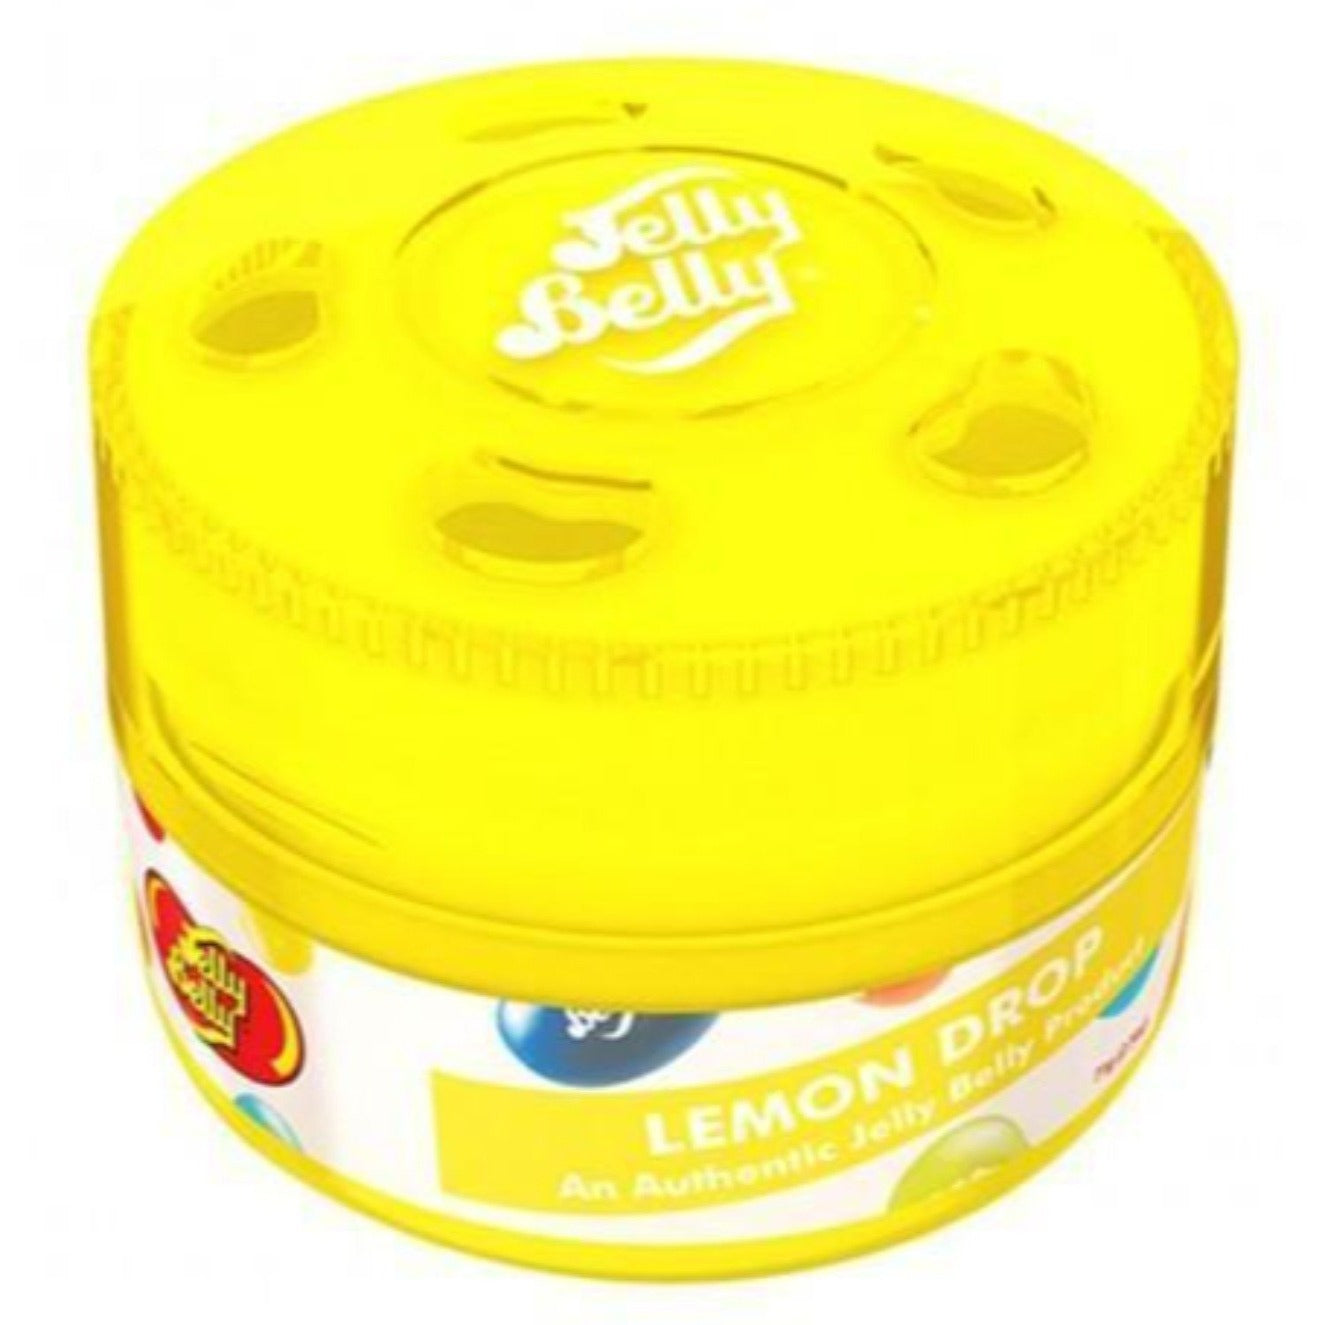 Jelly Belly-Gel Can Air Freshener Lemon Drop (Made in USA) Alliance Auto Products